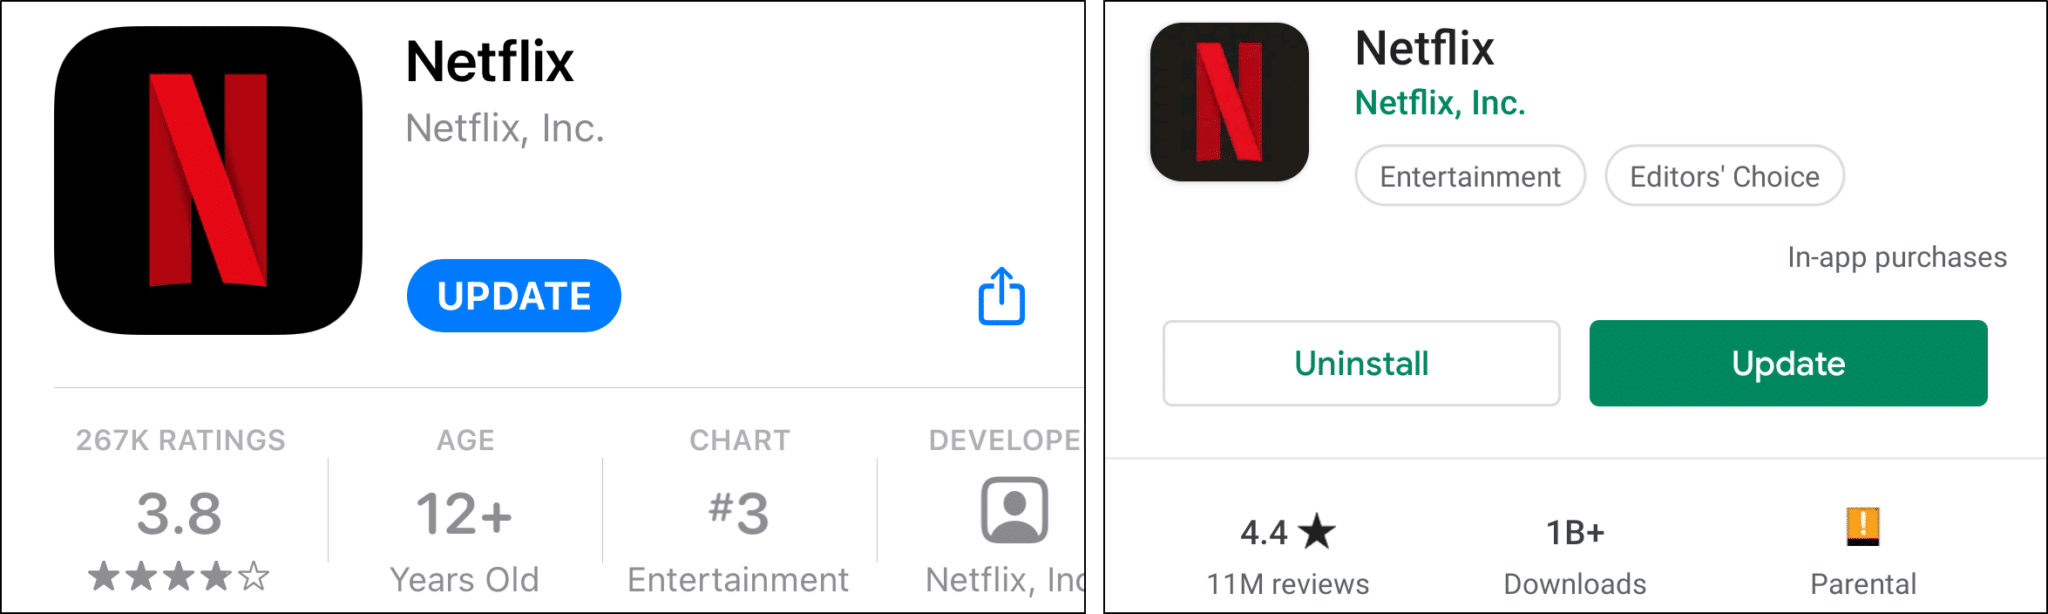 update the Netflix app to fix subtitles not working, out of sync or missing